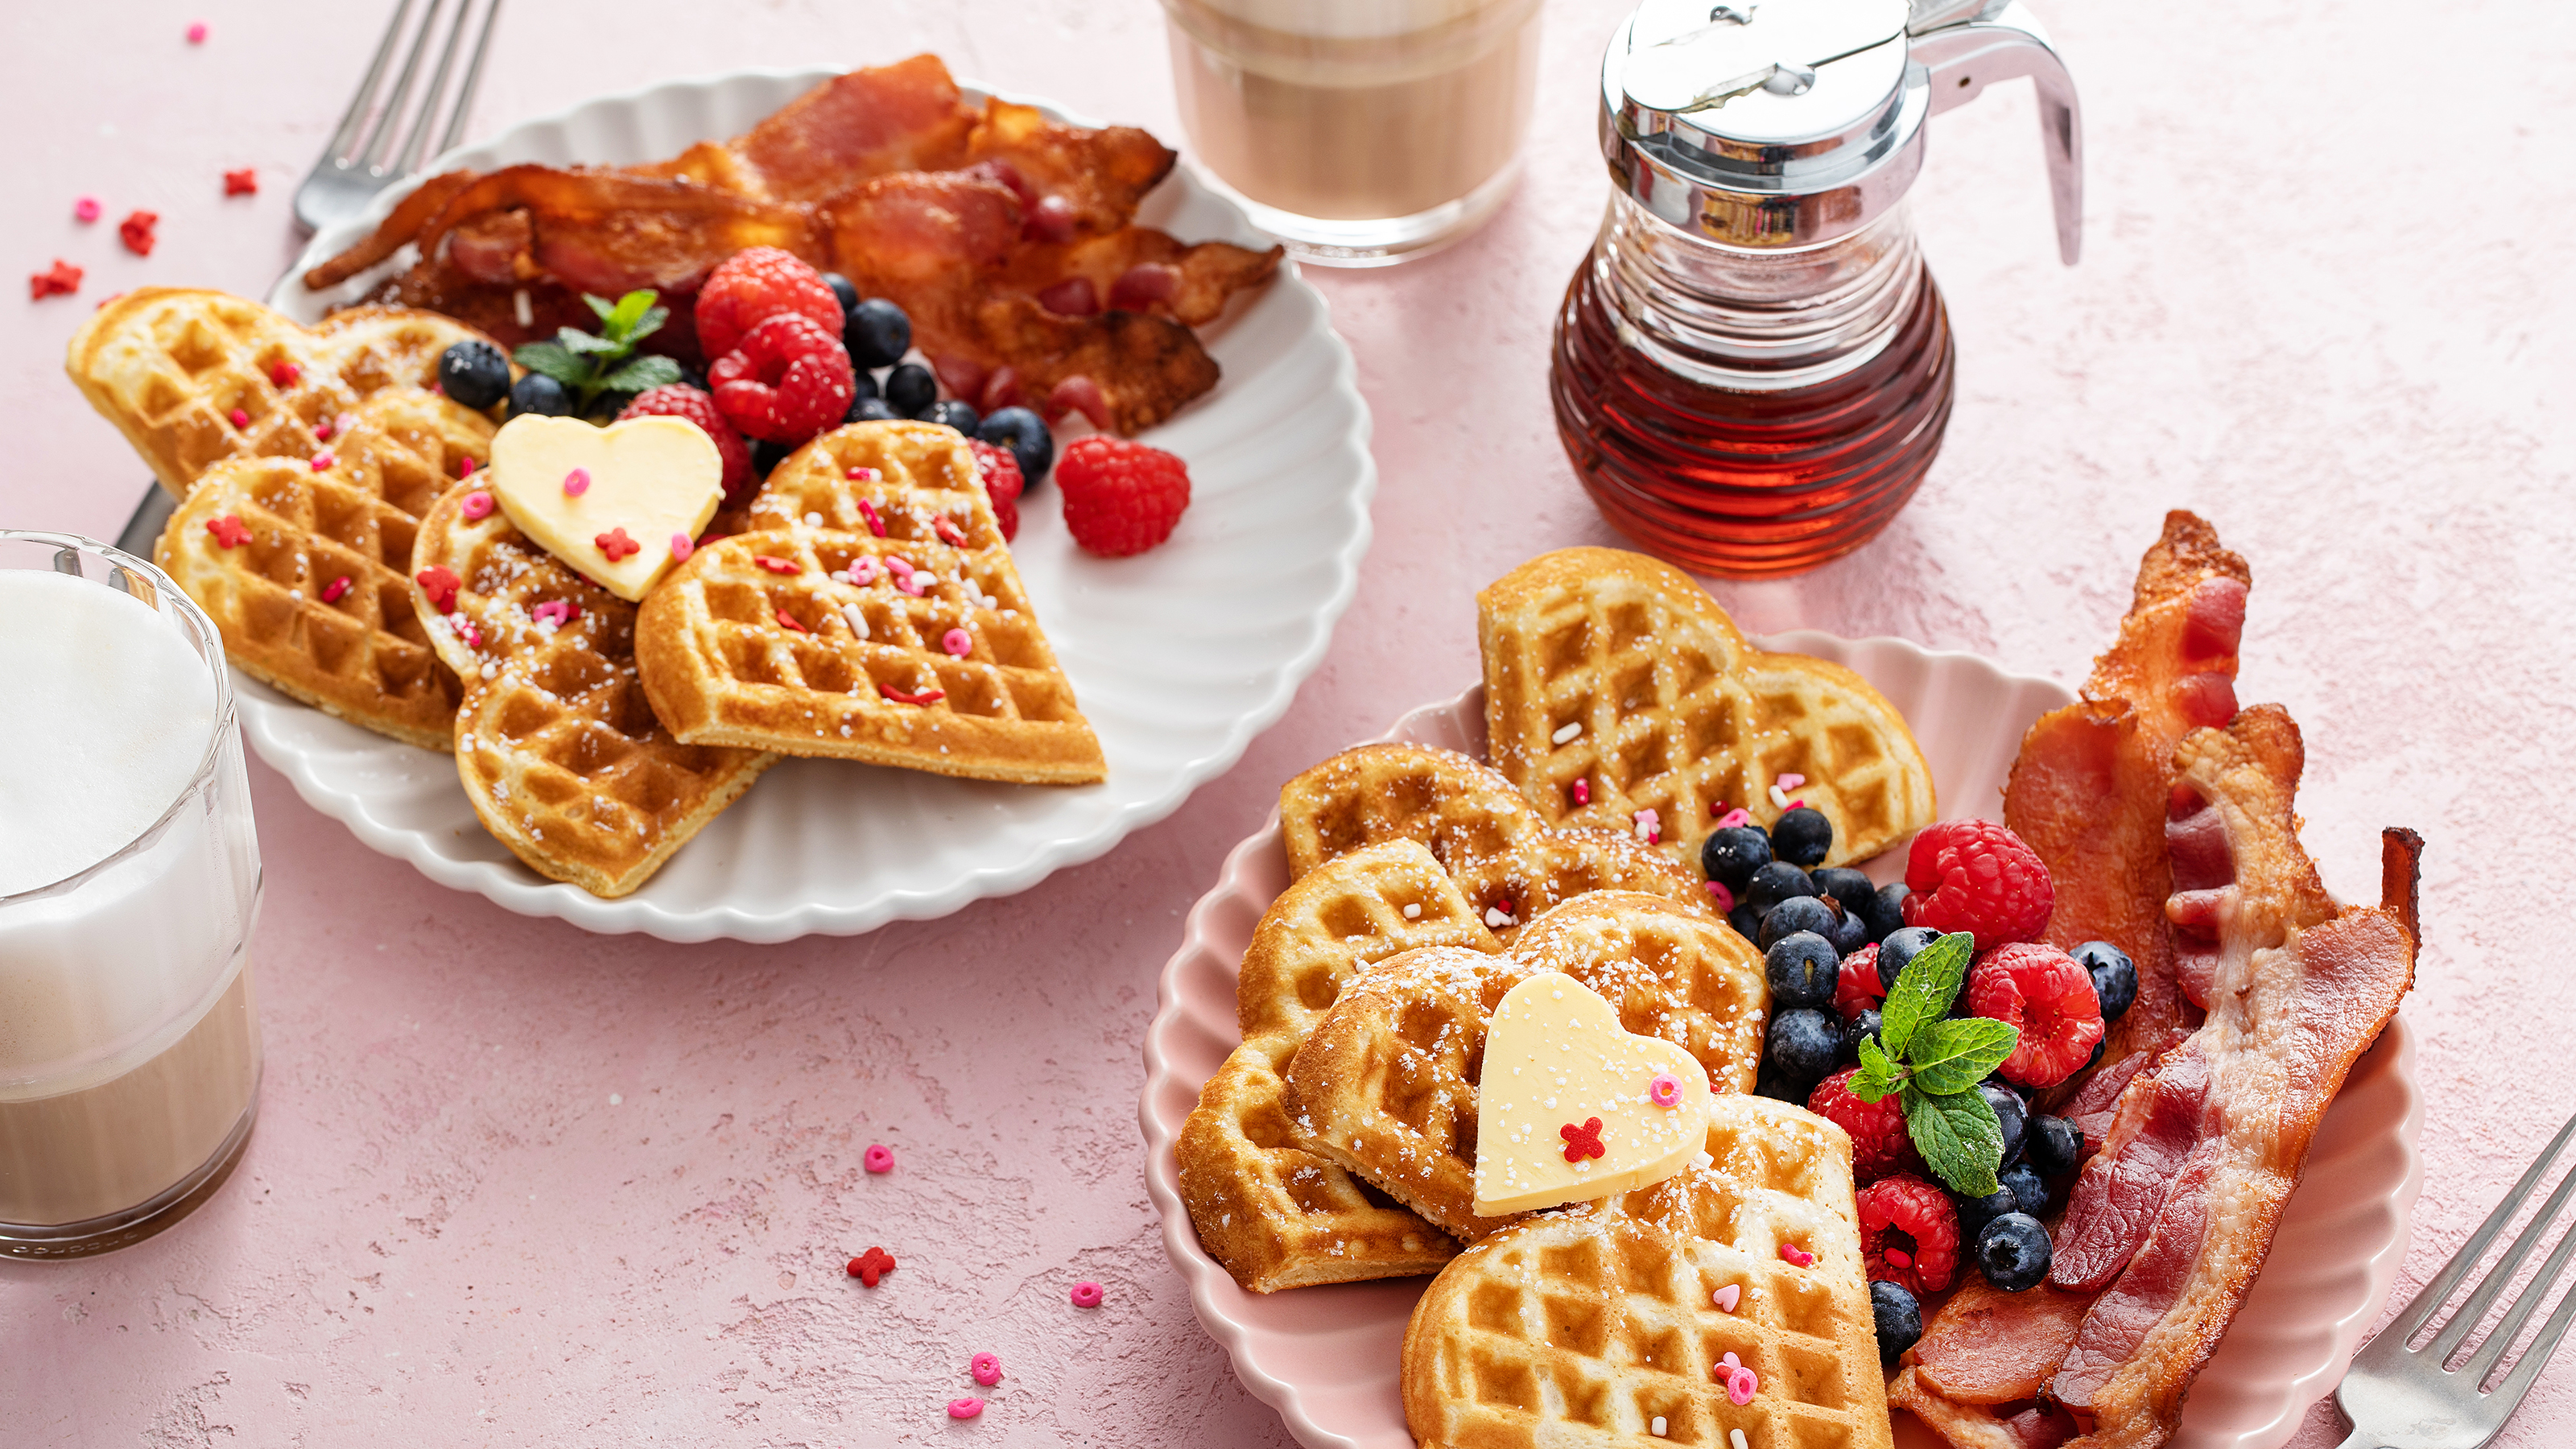 The Best Waffle Makers of 2023, According to Our Tests